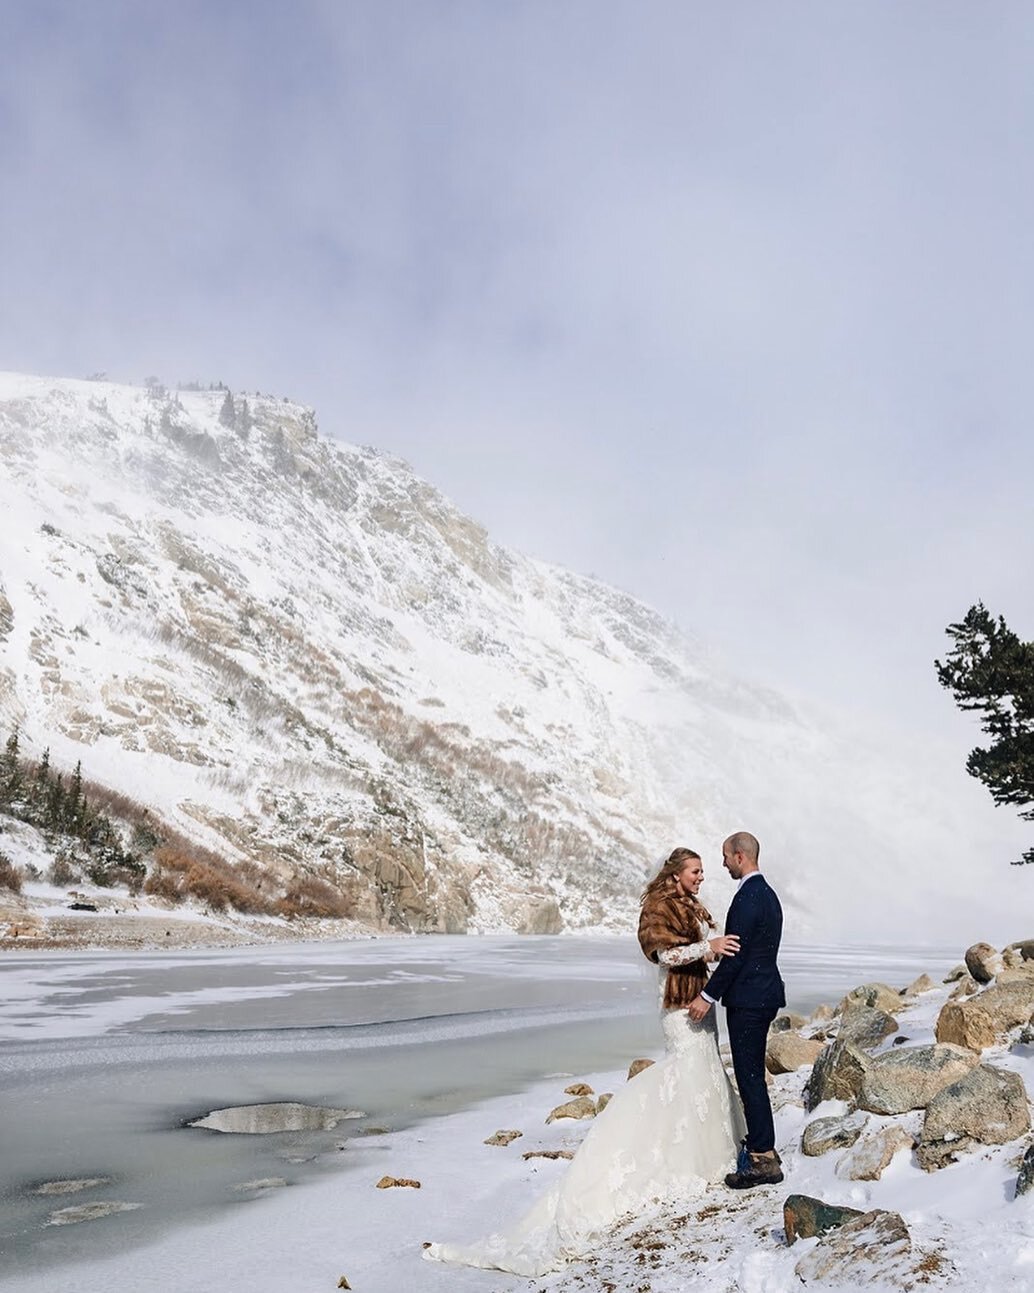 ❄️ We love a good snowy day ❄️ 

Do you love the snow or are you waiting for that summer sun to return?

Photographer | @jmgantphotography 
Videographer | @aflatis 
Reception Venue | @northstargatherings 
Entertainment | Dueling Pianos Roadshow
Cater